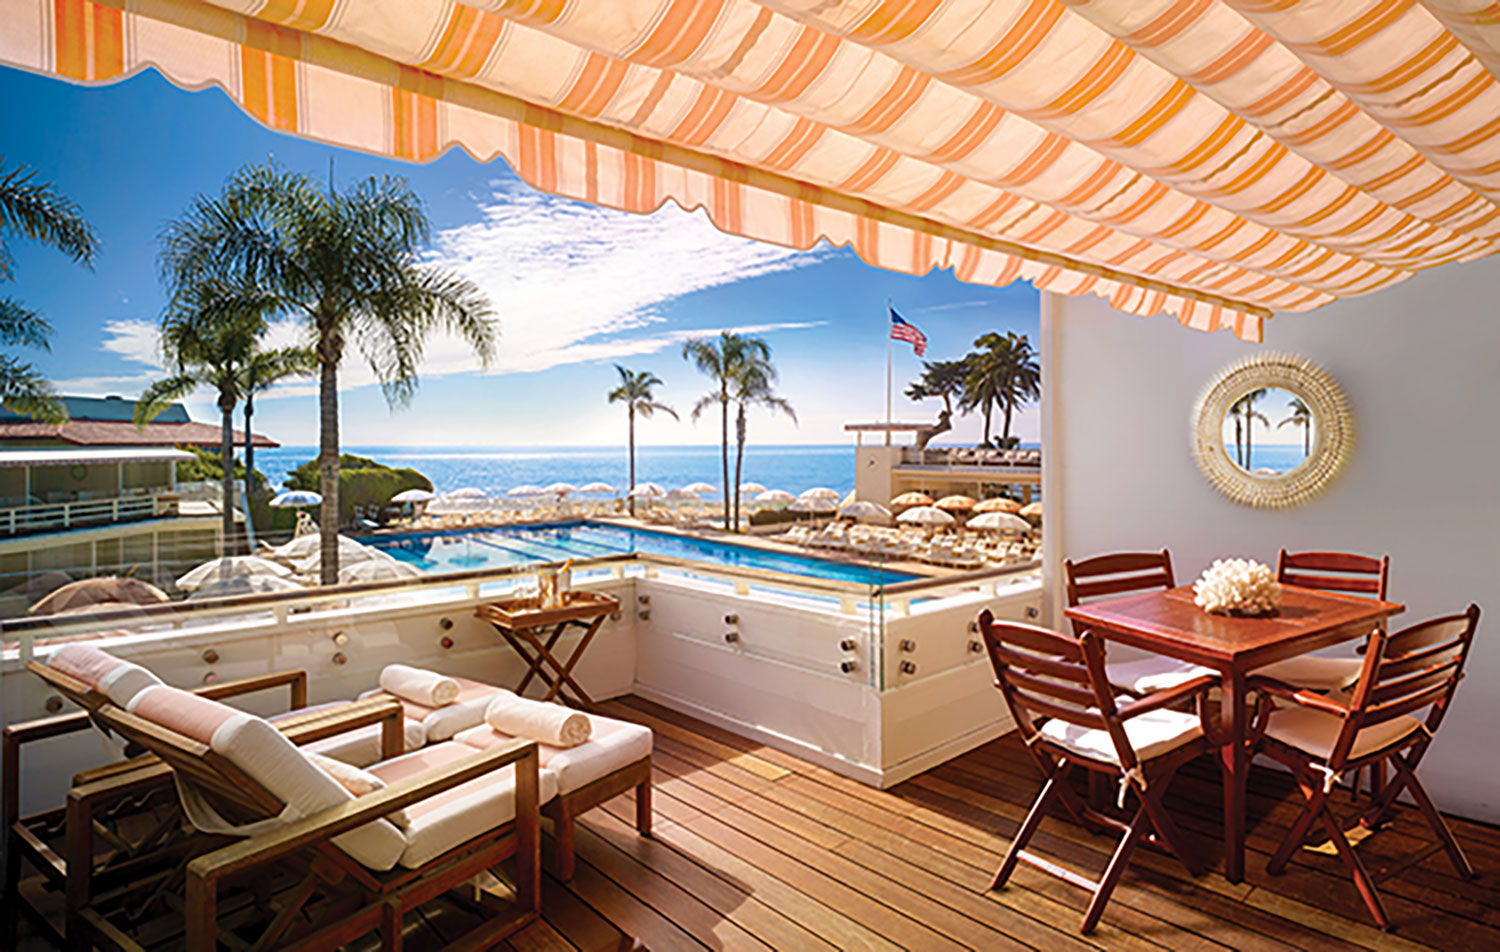 A covered patio area, featuring wood plant floors, teak patio furniture, and a yellow and white striped awning, looks out onto a pool at the Four Seasons Hotel Santa Barbara and a view of the coast beyond